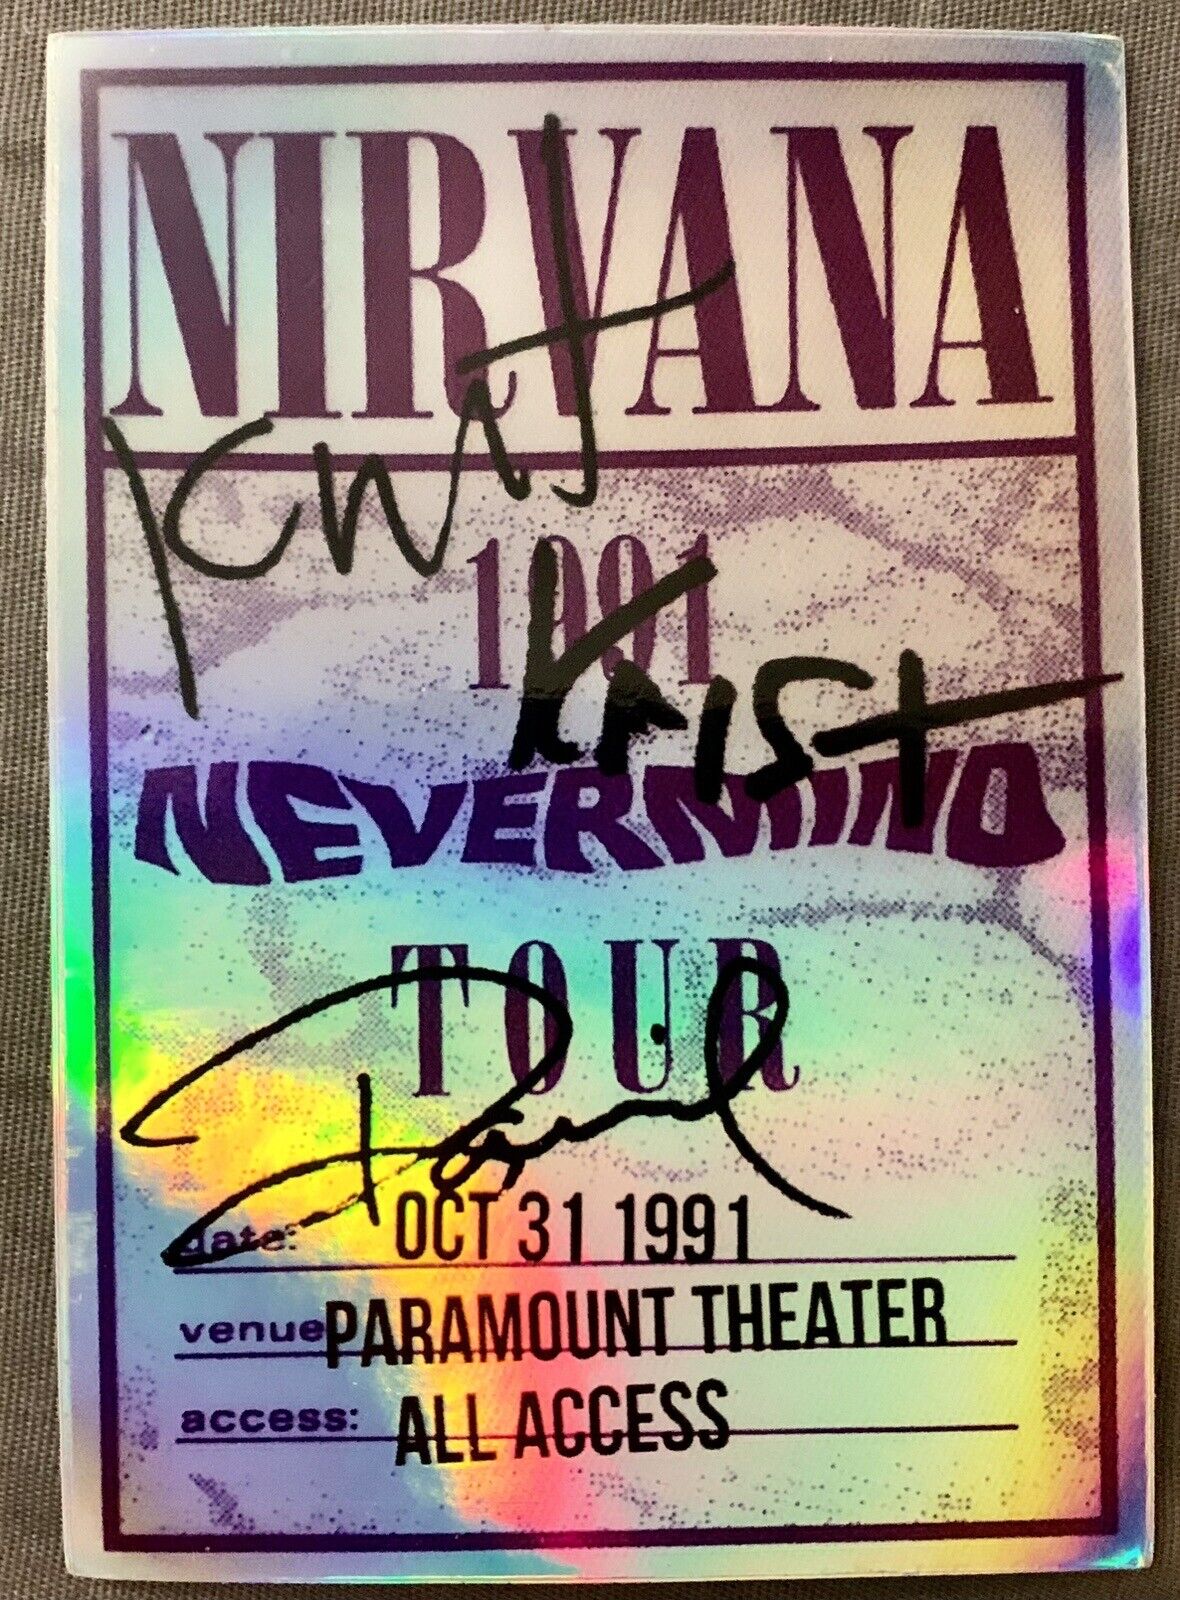 NIRVANA Holo-Decal/Sticker Glossy 3x4” 1991 All Access Backstage Pass SEATTLE